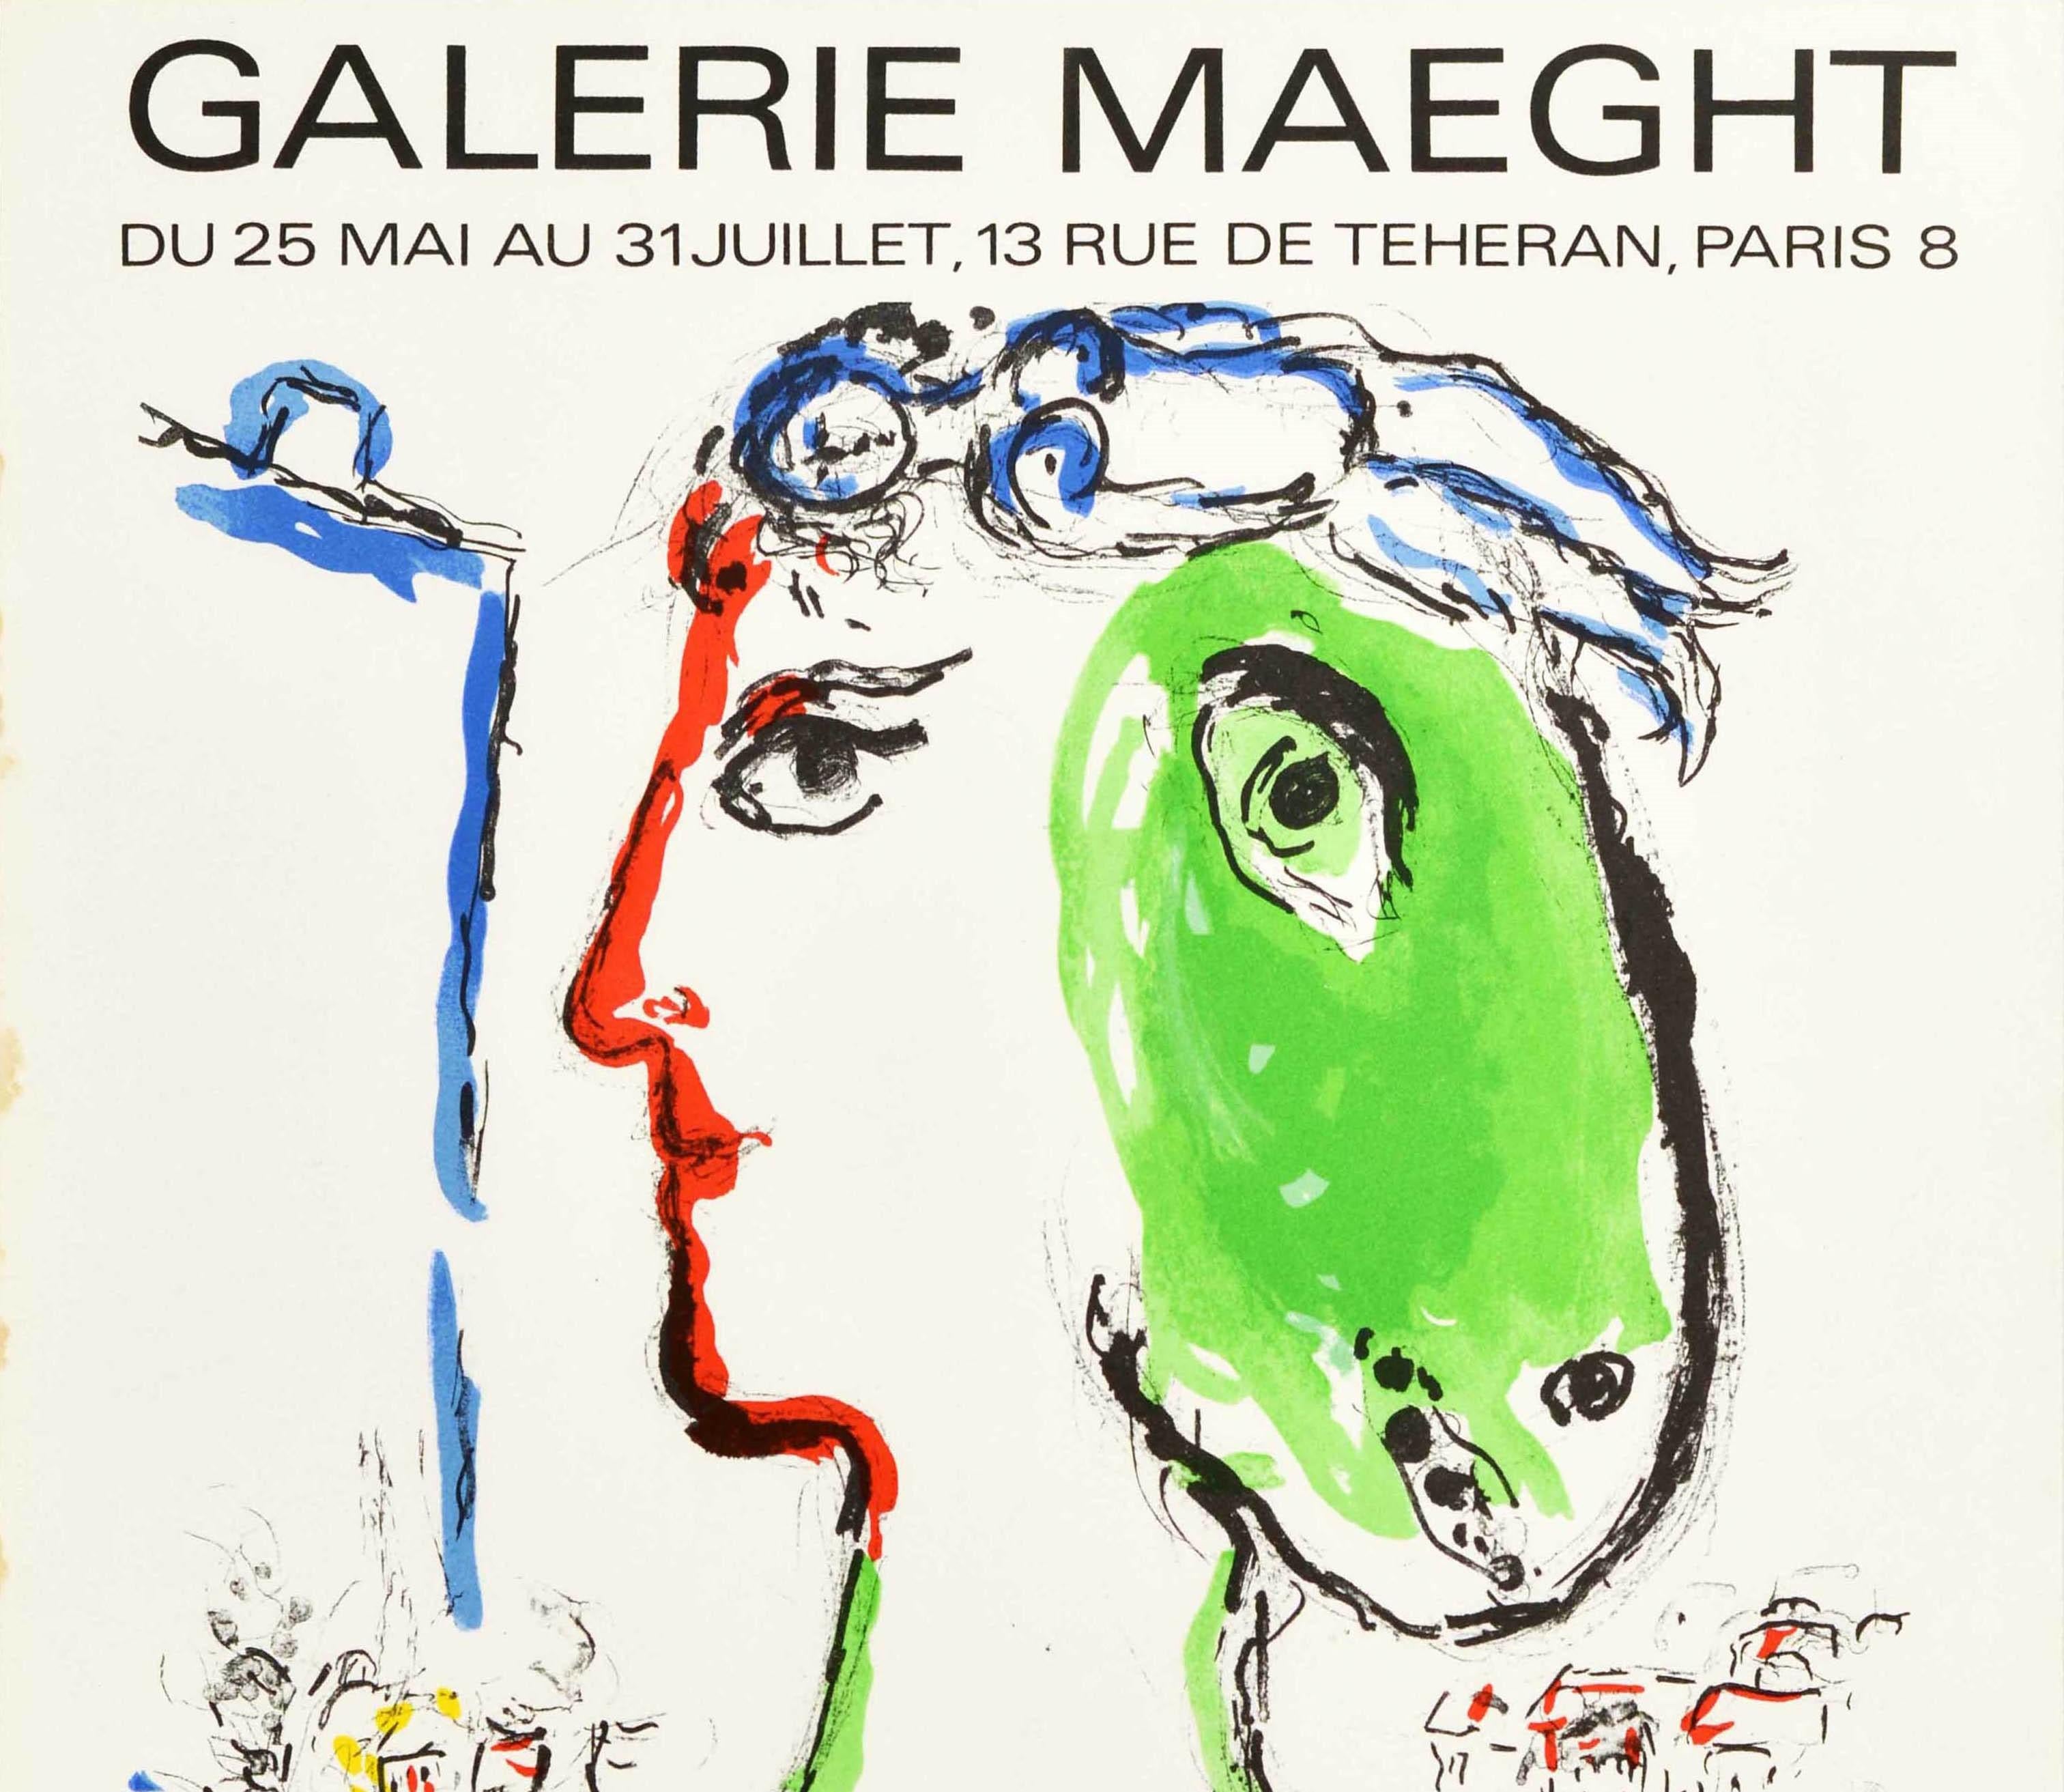 Original vintage art exhibition poster - Chagall Galerie Maeght Paris - featuring The Artist As A Phoenix by the notable artist Marc Chagall (1887-1985) depicting a head with a man's face and a horse on the other side and a person lying above with